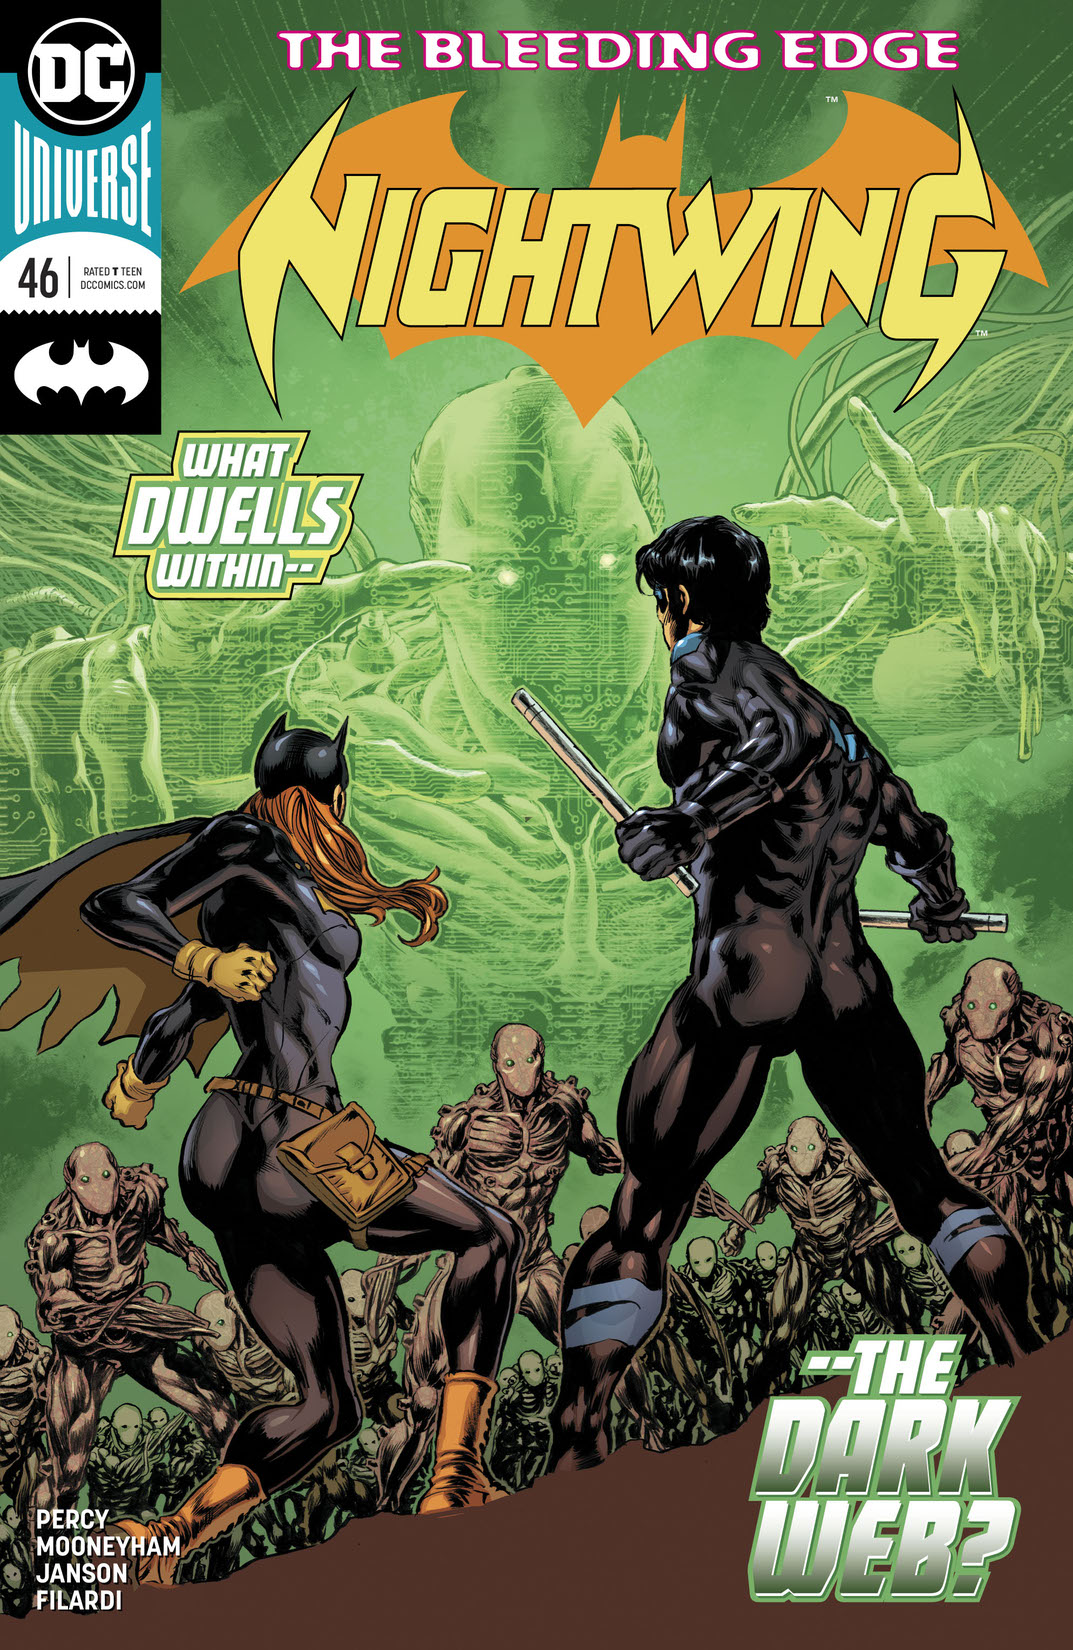 Nightwing (2016-) #46 preview images